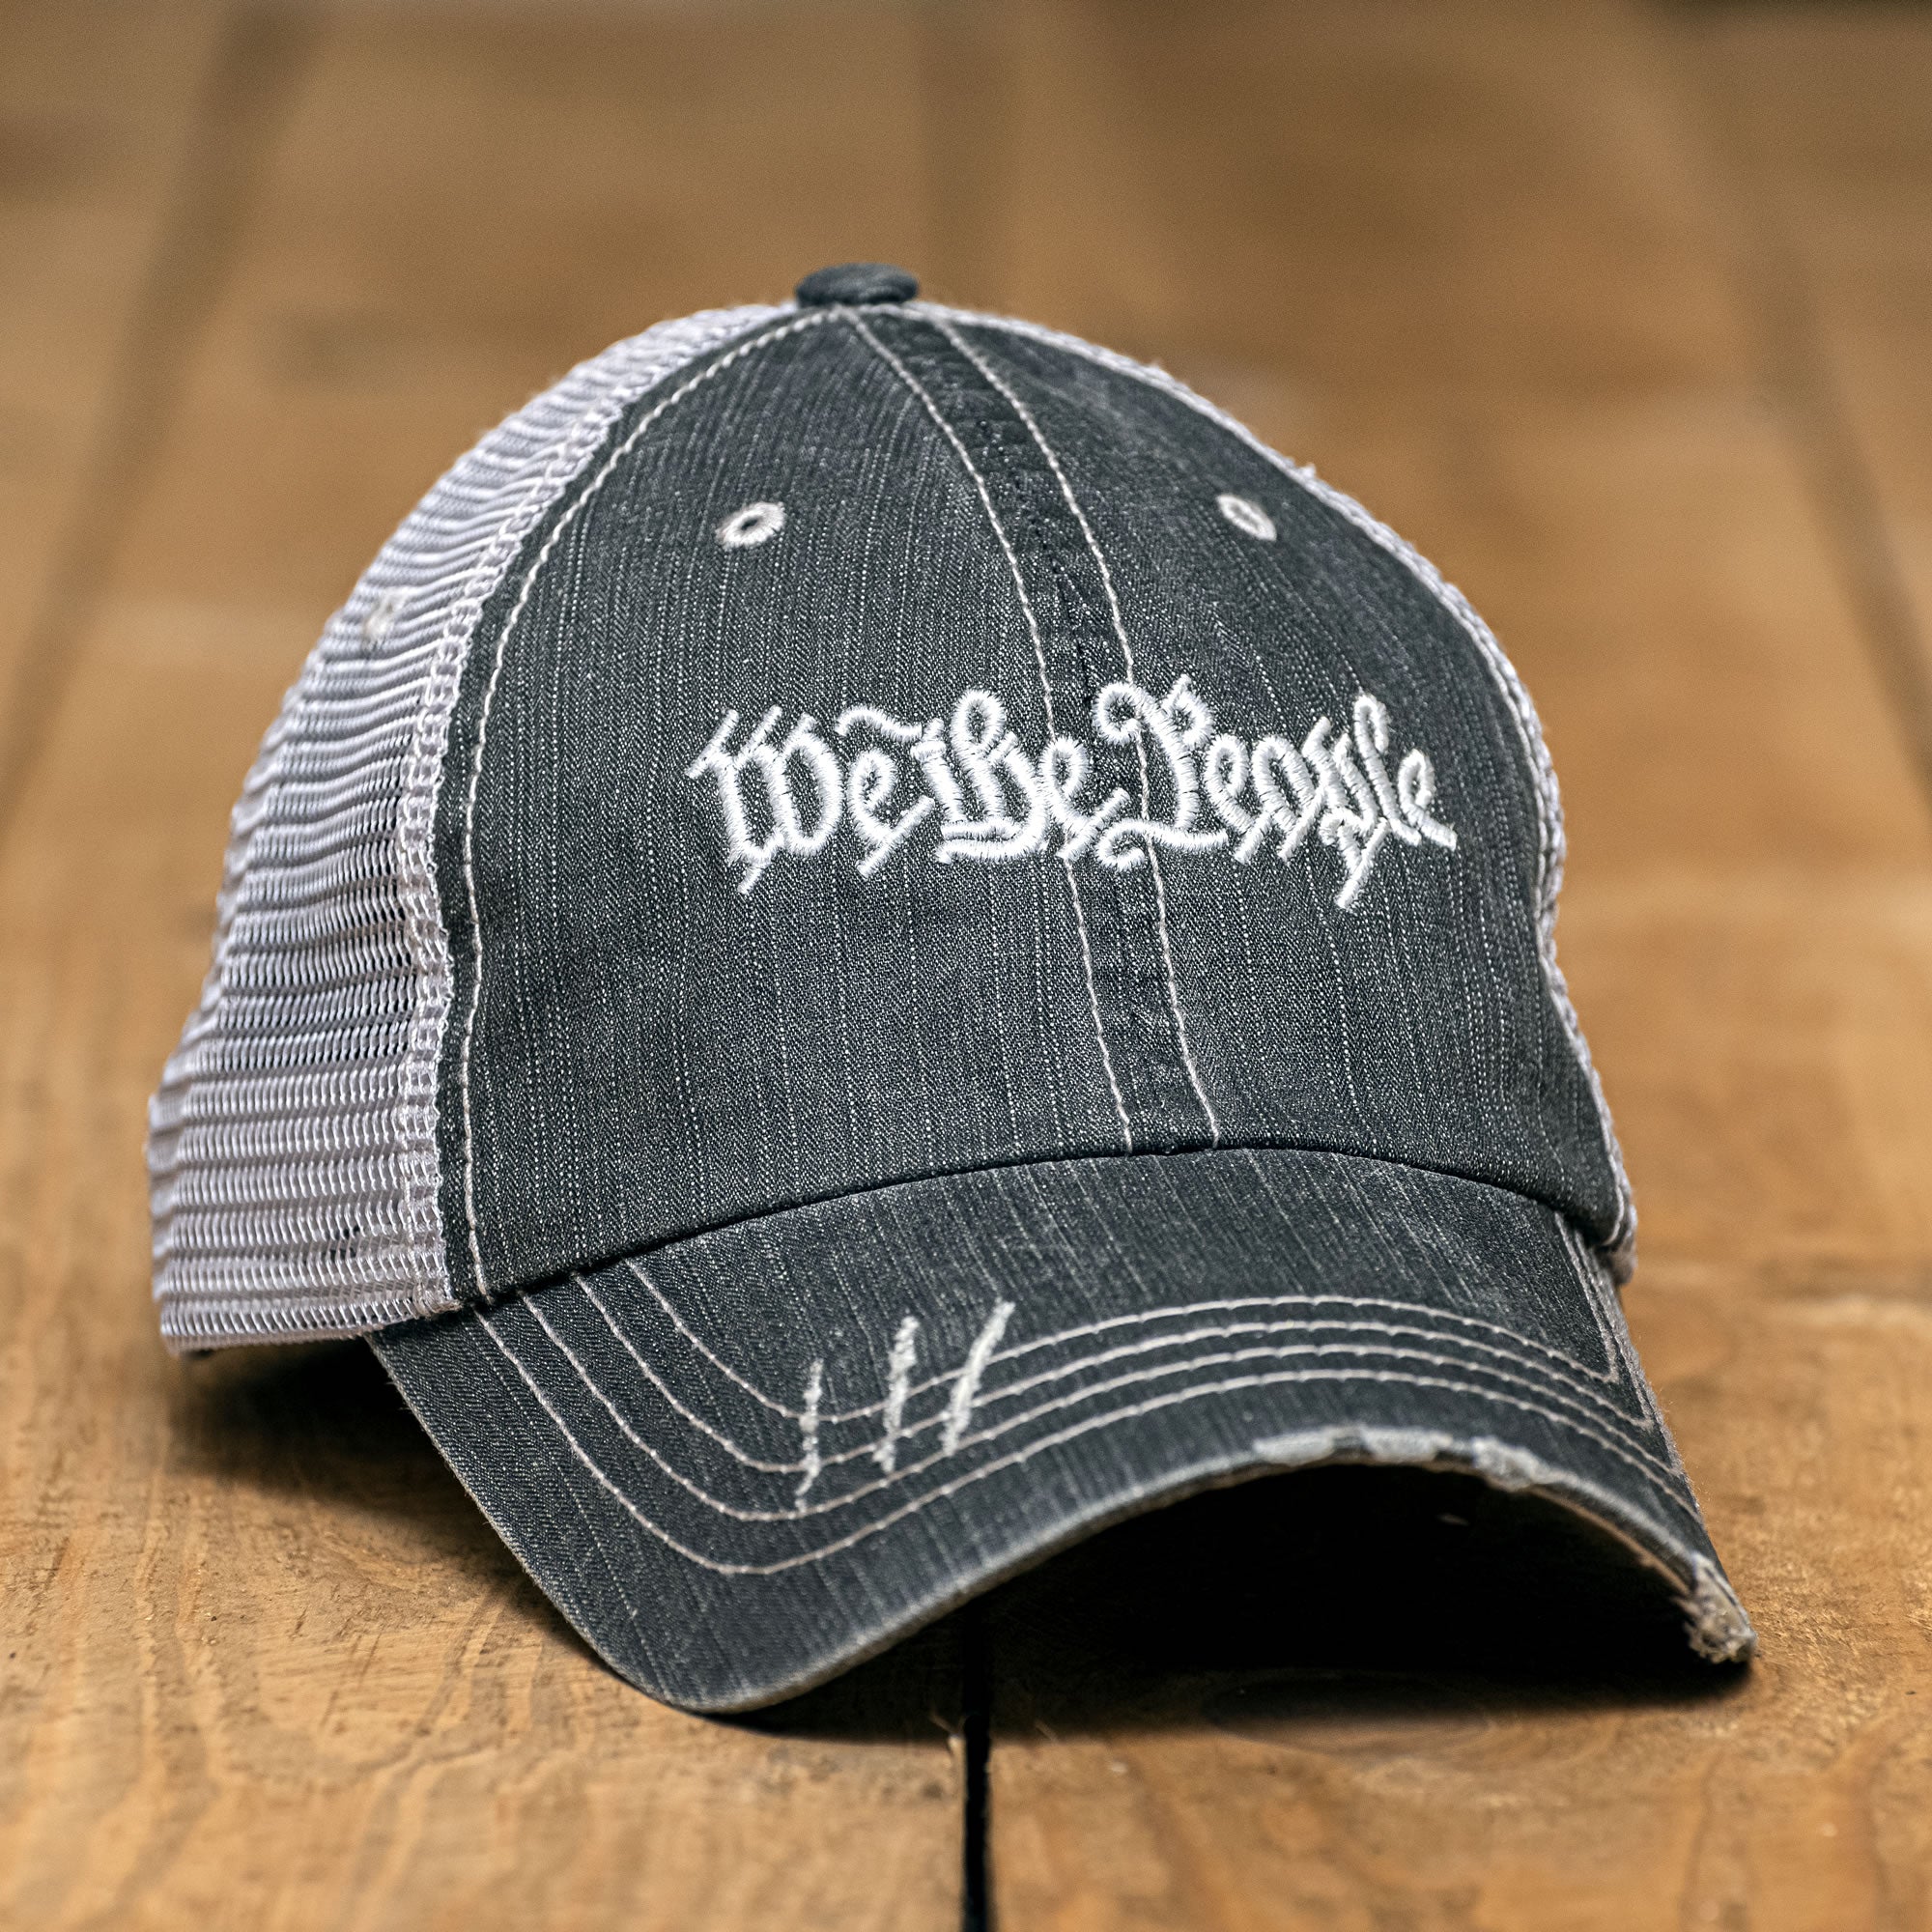 We The People Distressed Style Hat Hats Black One size 